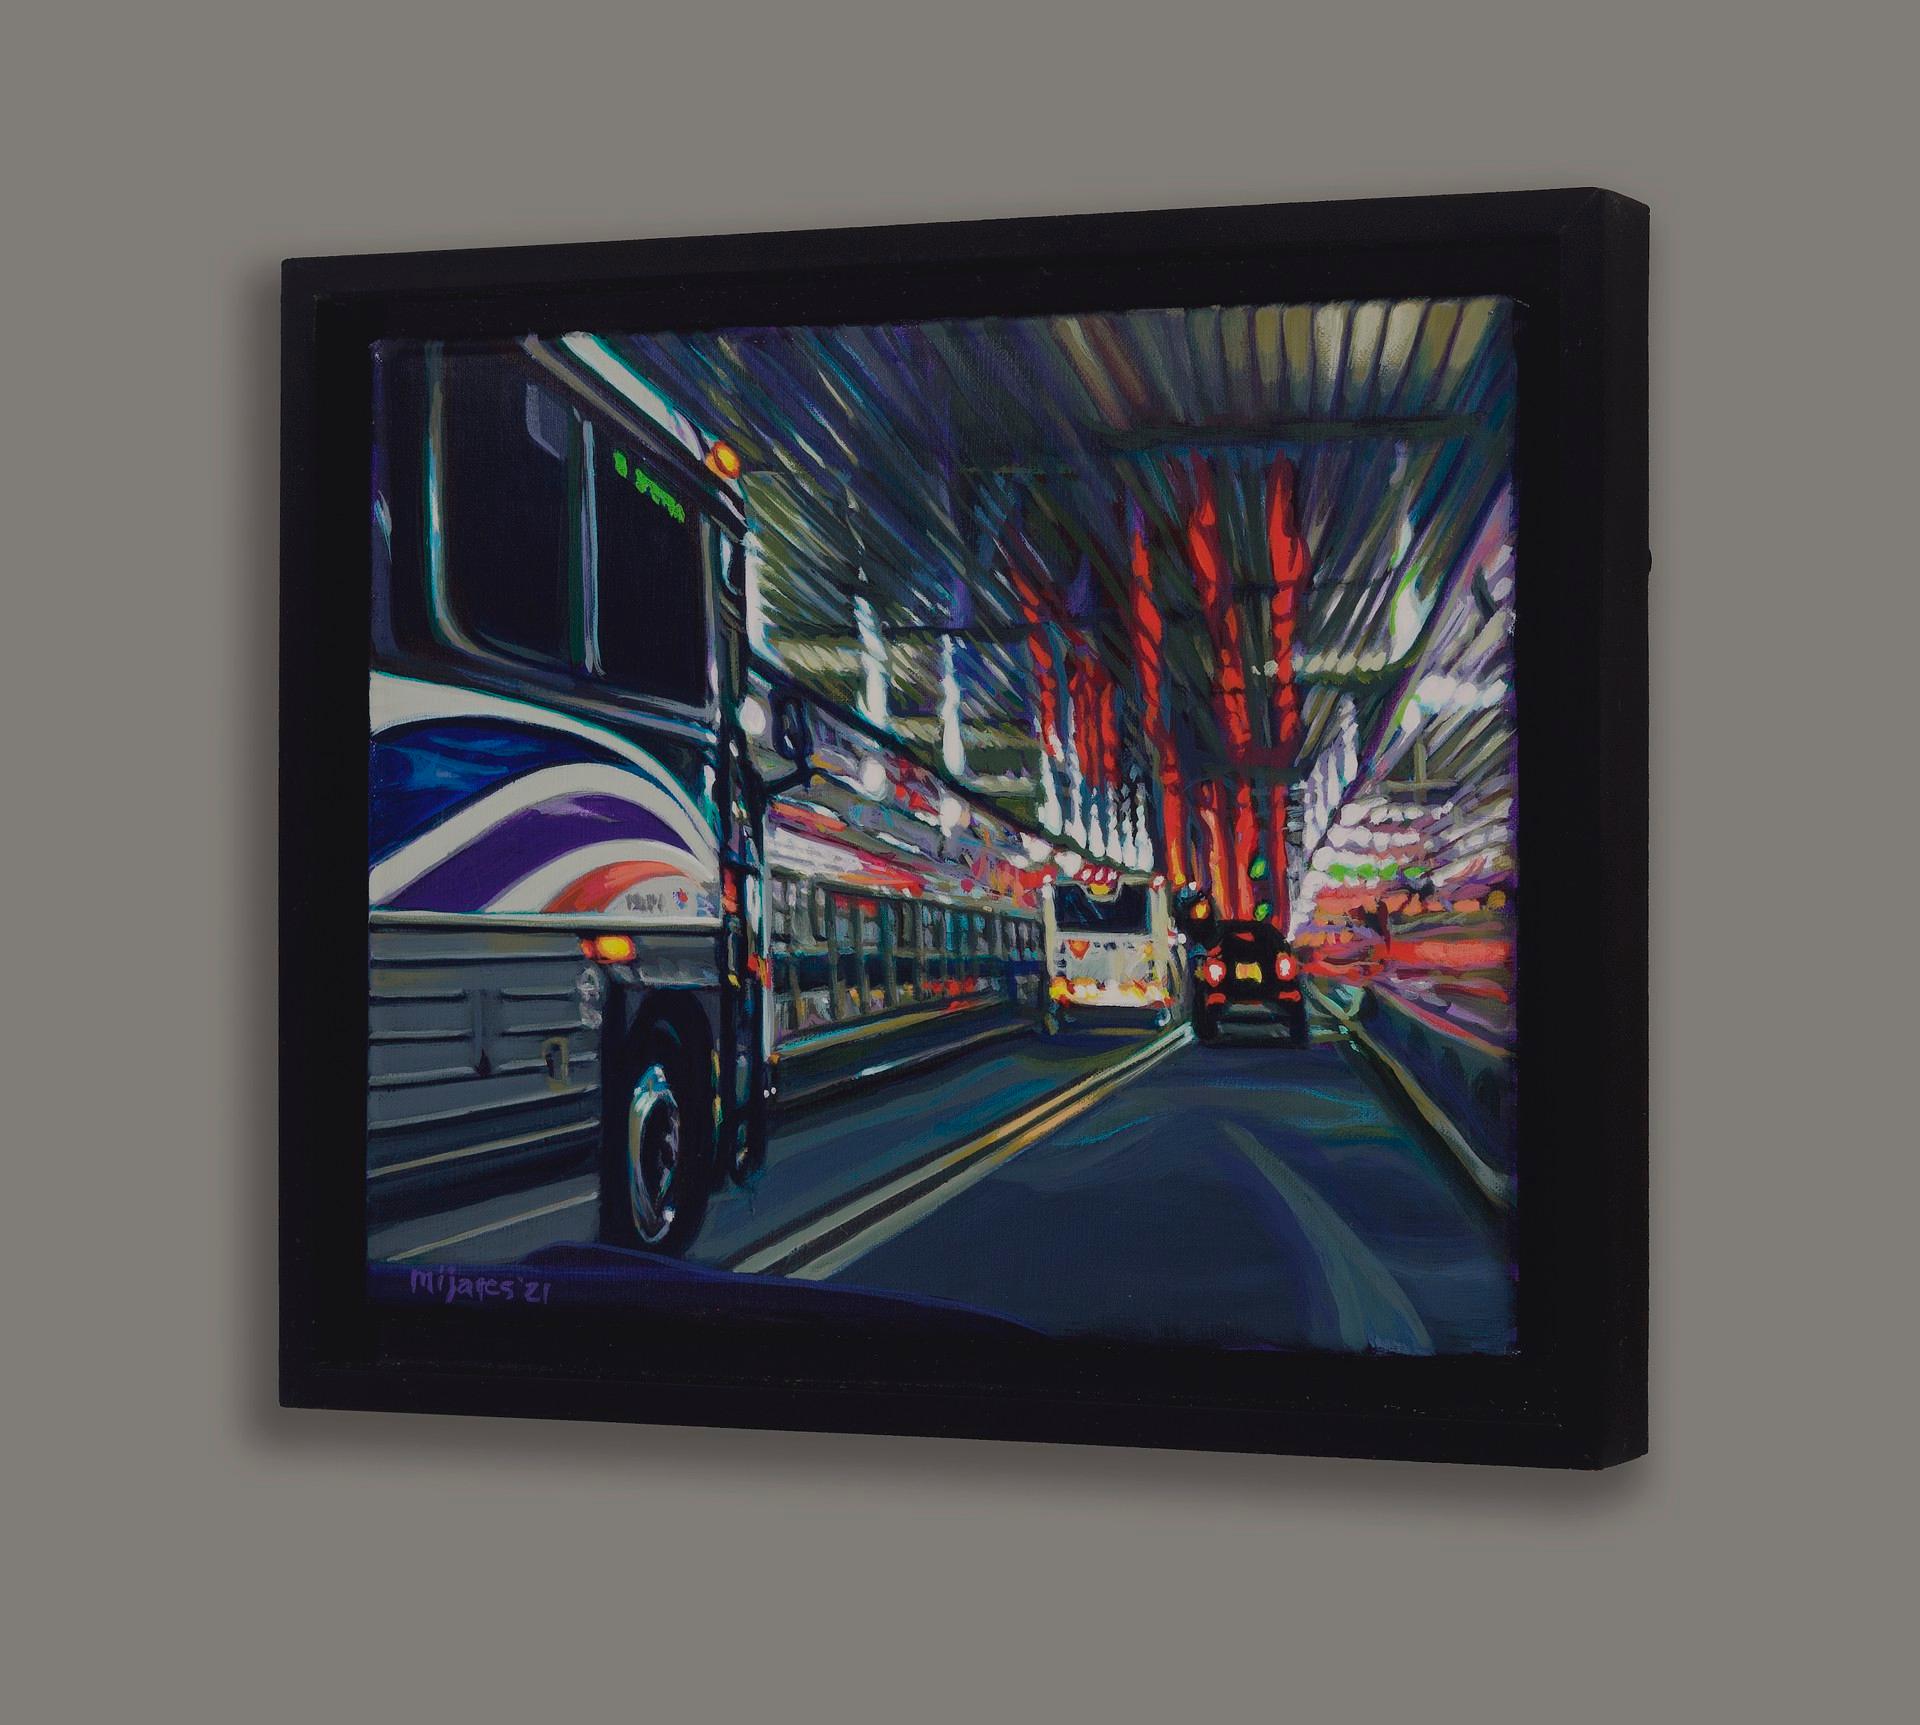 Lincoln Tunnel (Bus) - Painting by Maria Mijares